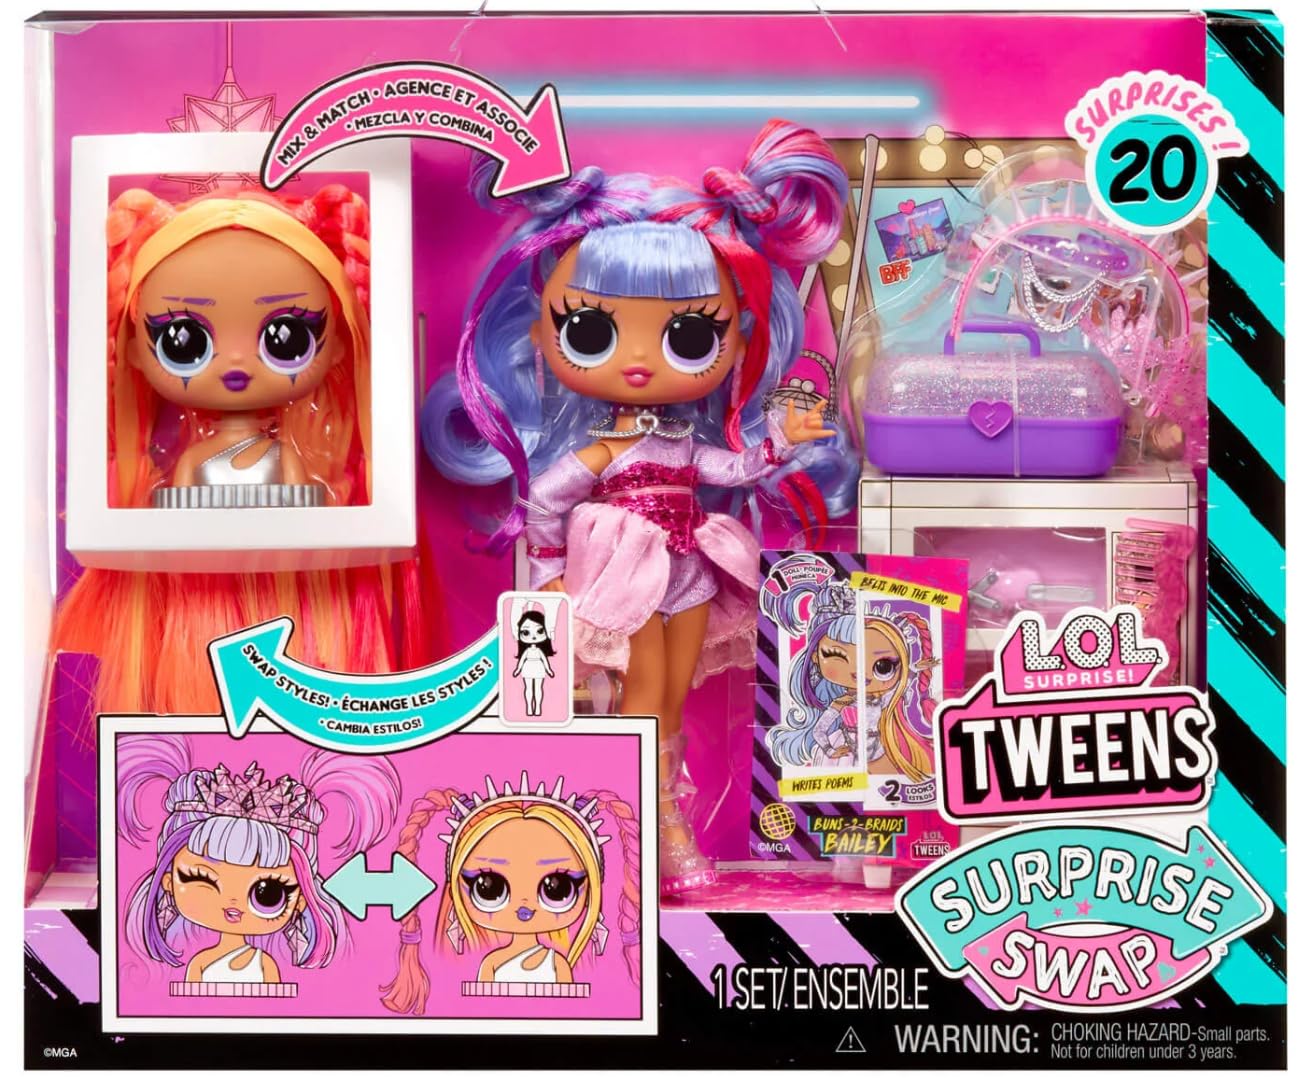 LOL Surprise Tweens Surprise Swap Fashion Doll Buns-2-Braids Bailey with 20+ Surprises Including Styling Head and Fabulous Fashions and Accessories Kids Gift Ages 4+